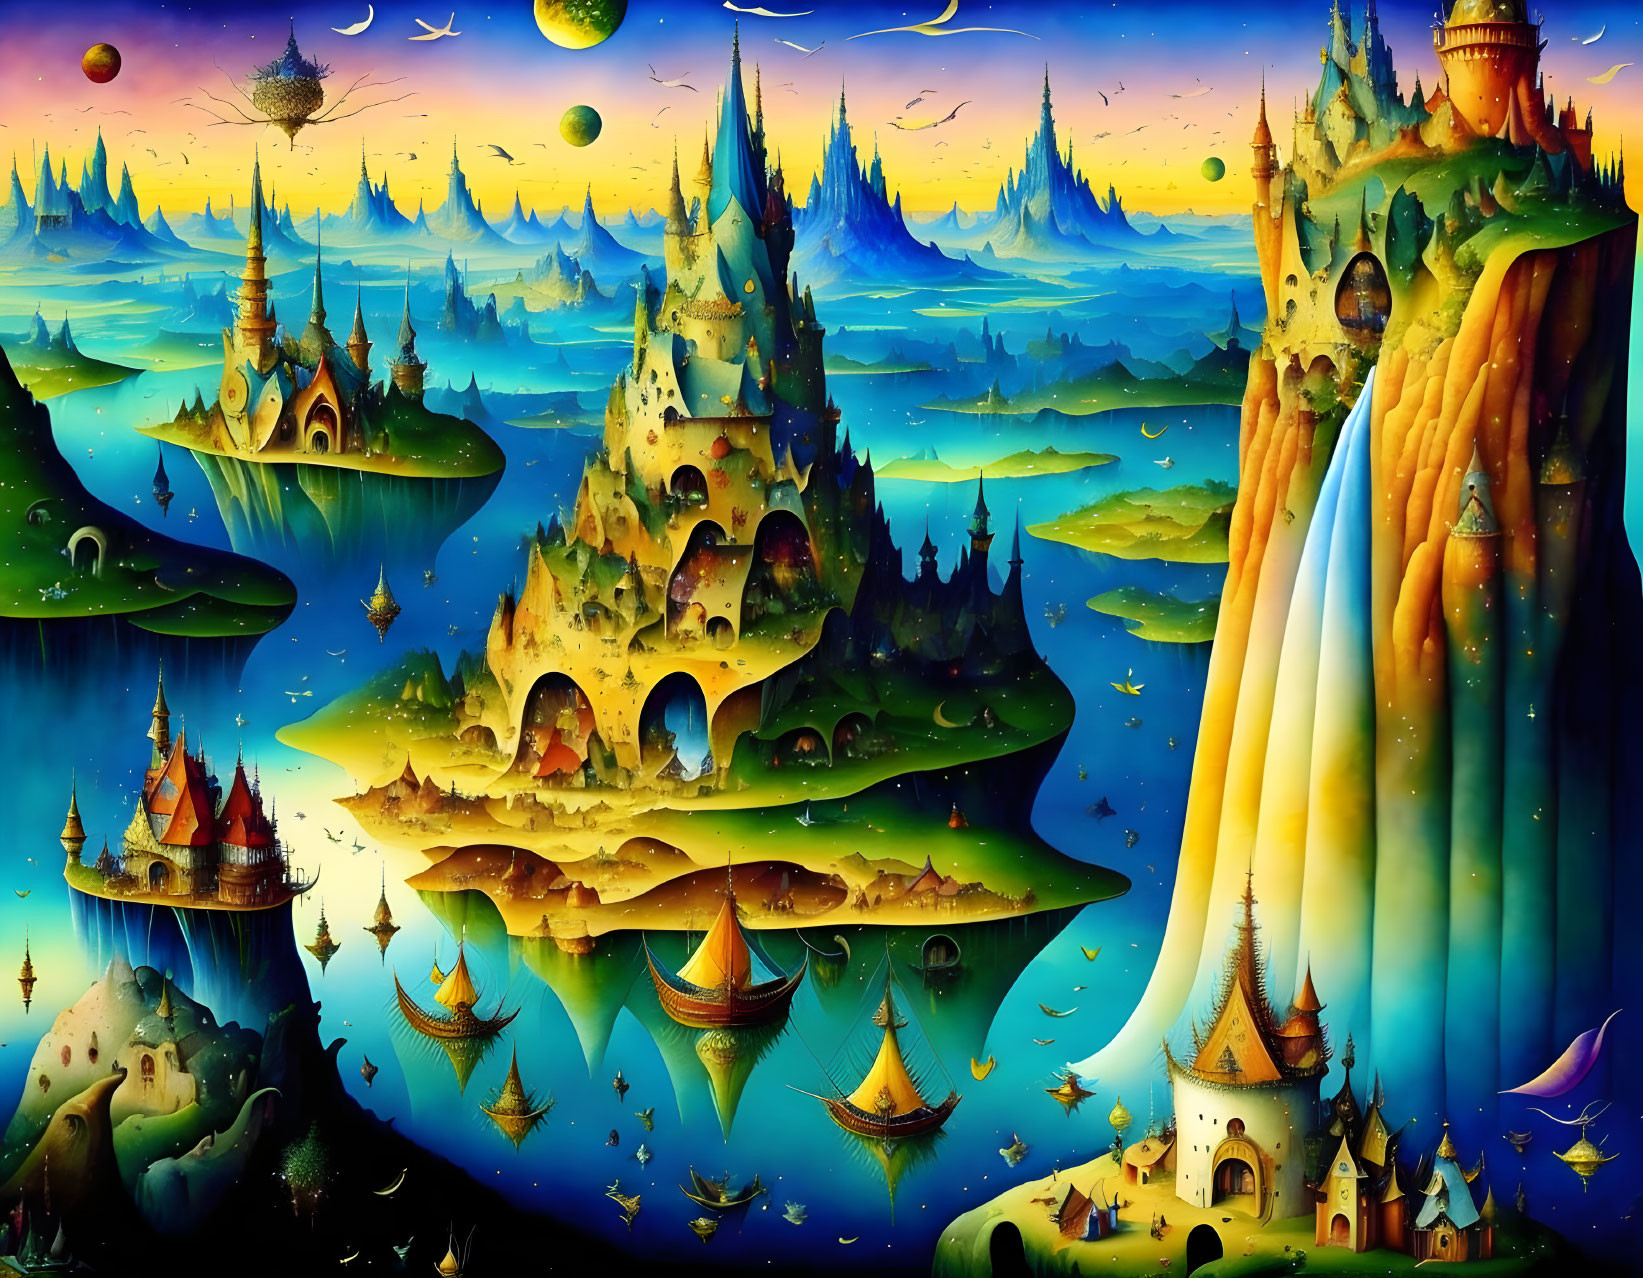 Fantastical landscape with castles, waterfalls, and flying ships under a starry sky